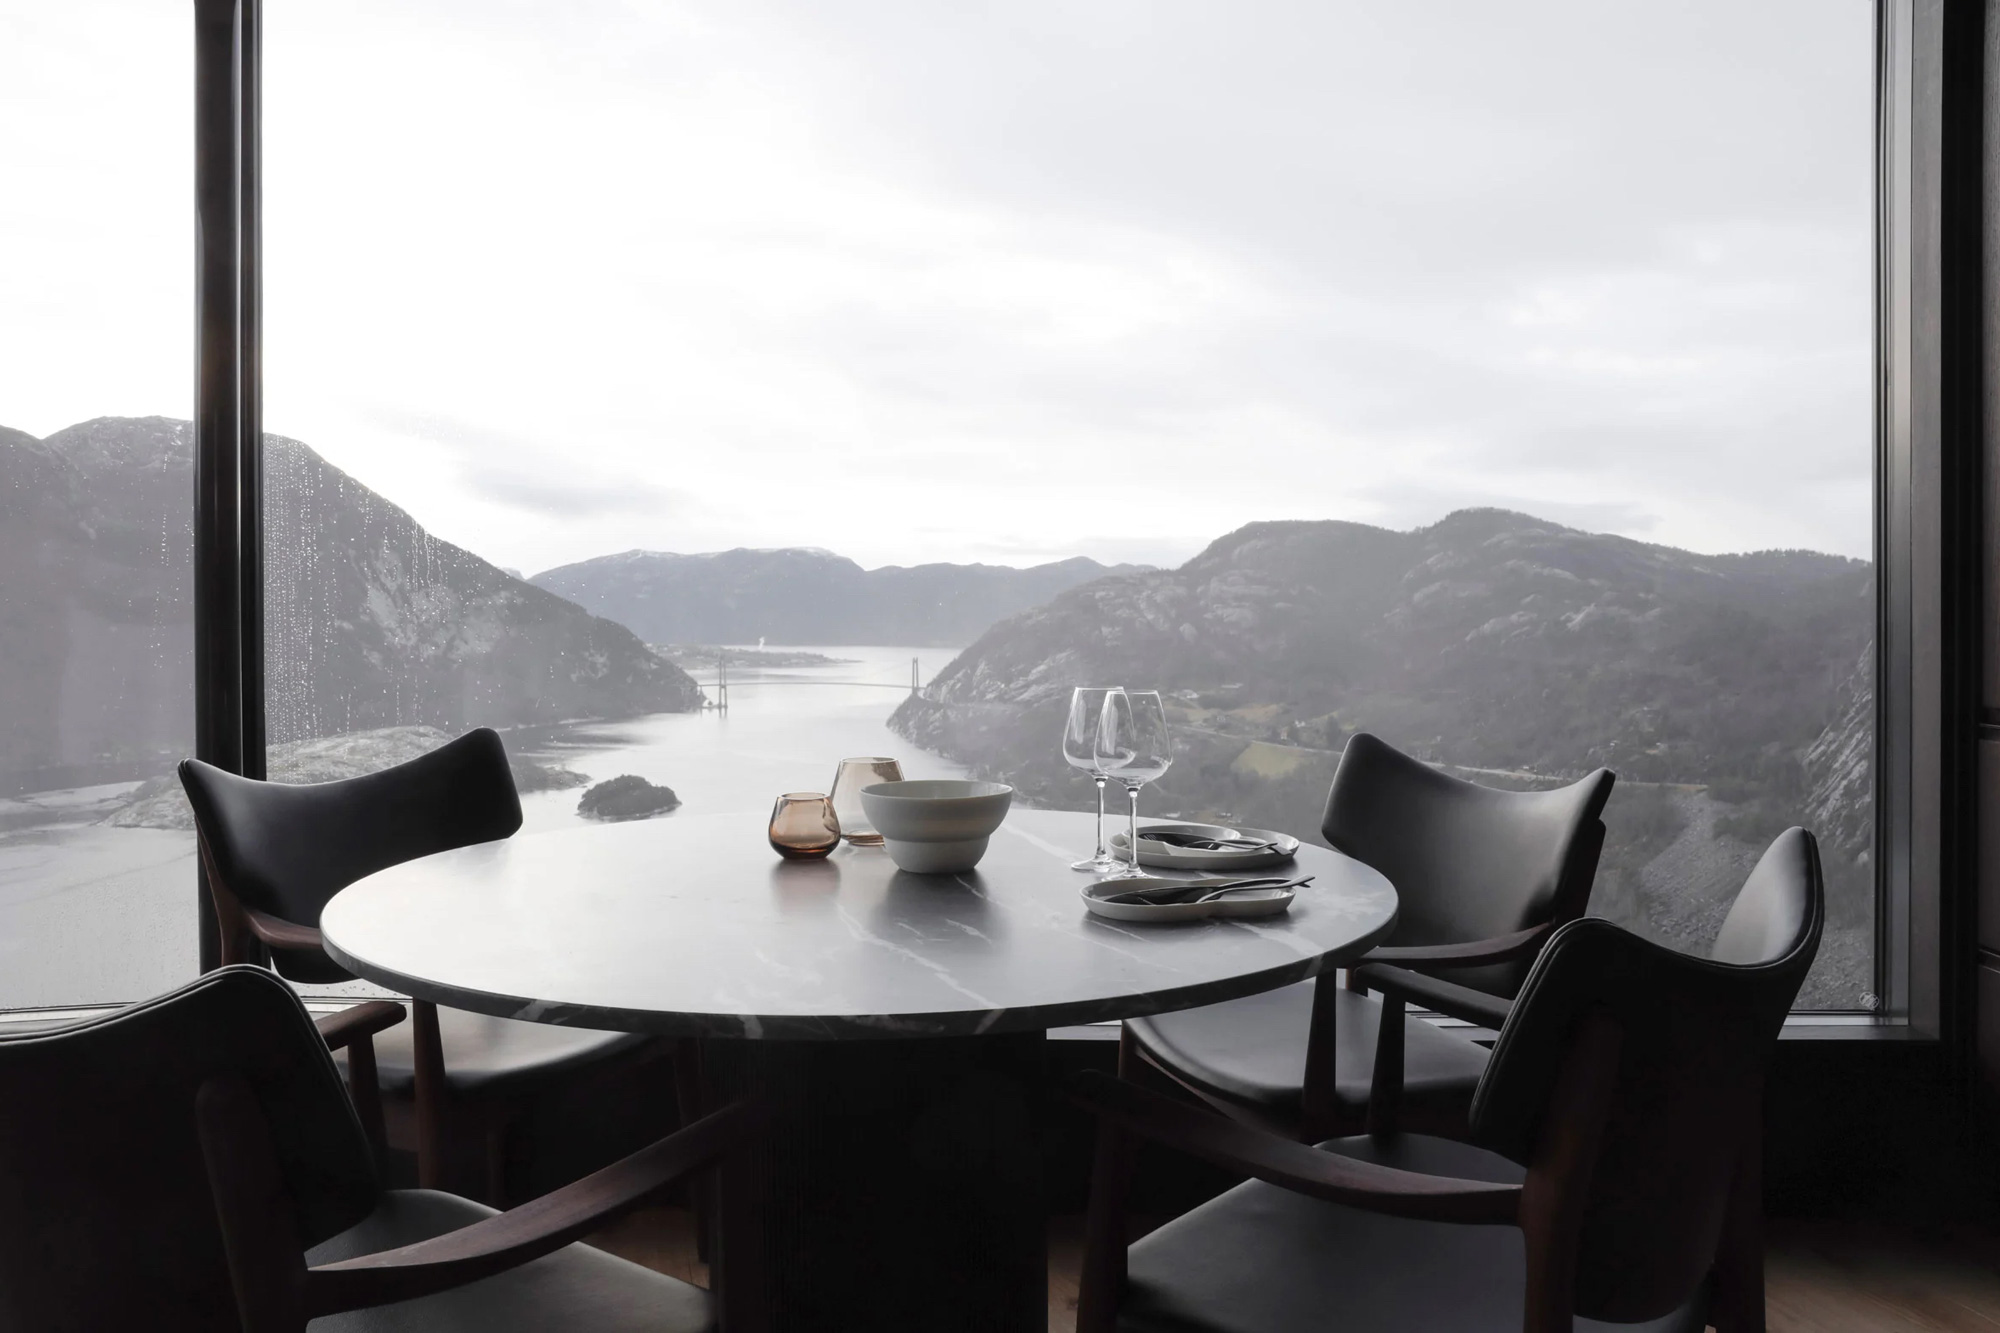 The Bolder Forsand Rogaland Norway hotel stay